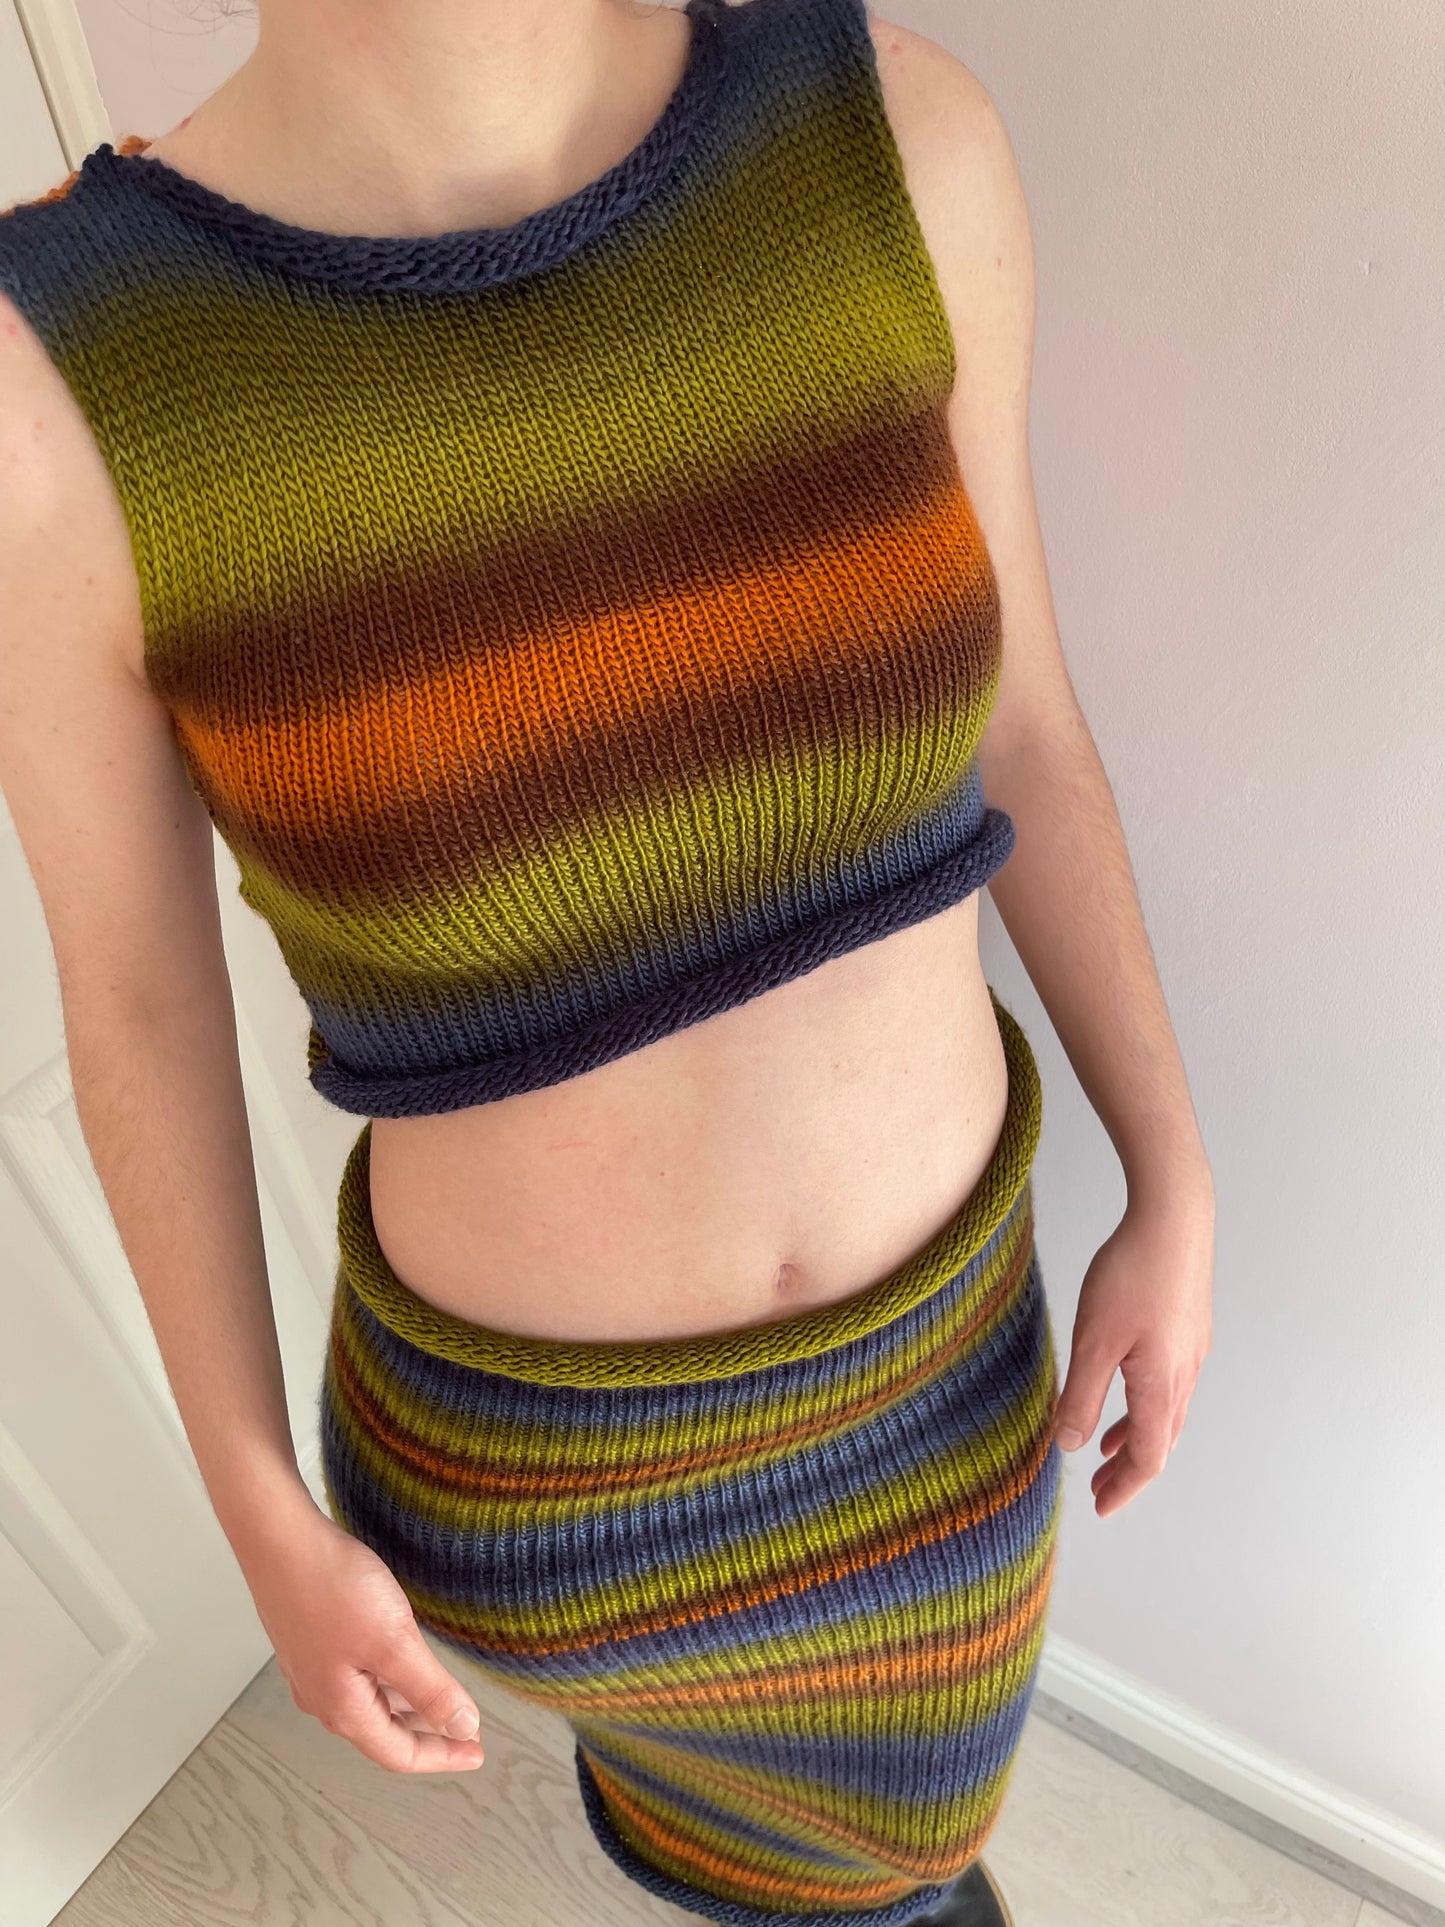 The Aspen Set - handmade knitted ombré vest and maxi skirt with side slit